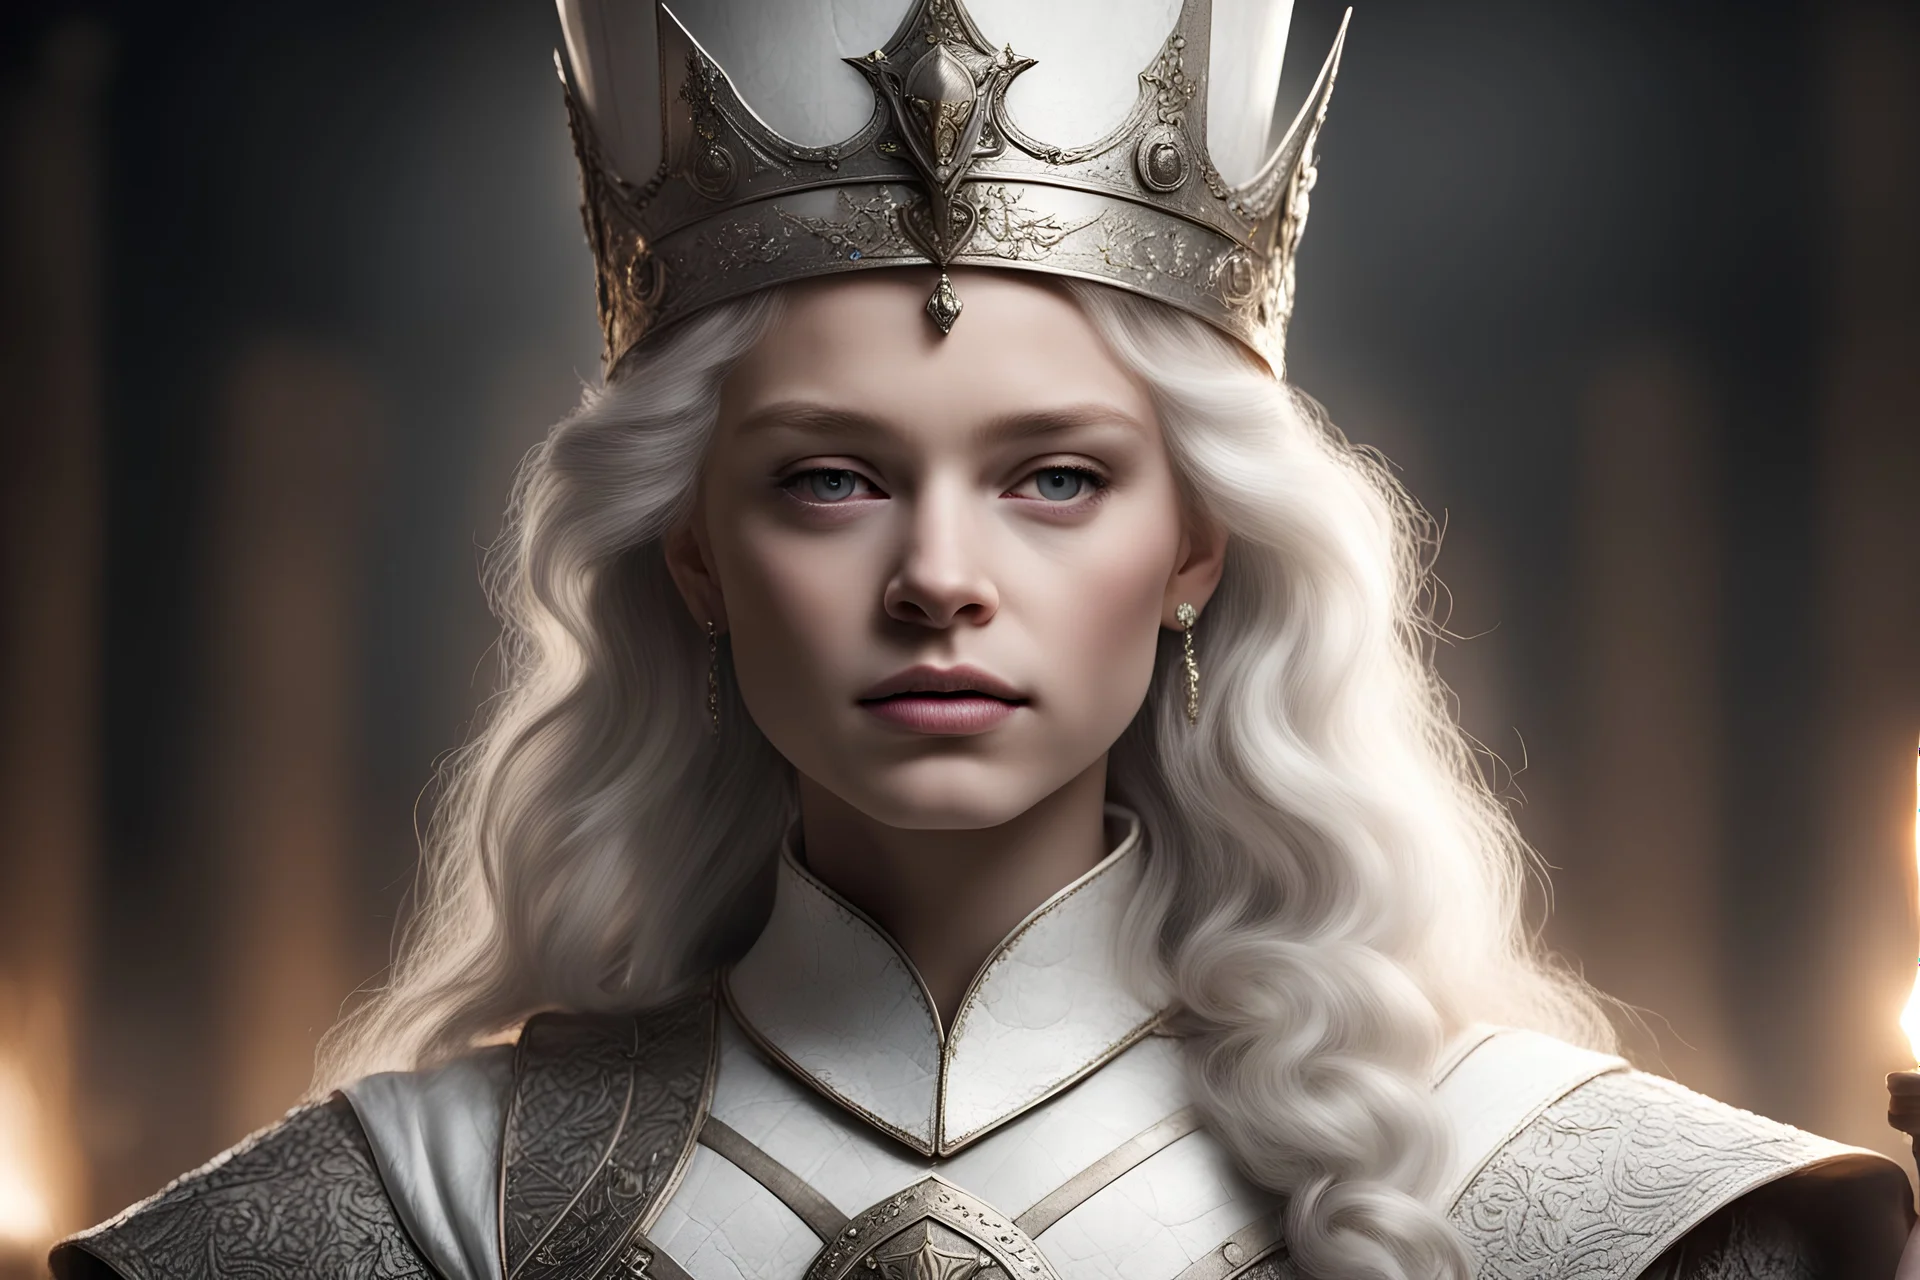 the queen, not too young, good, brave warrior, lighting, medieval, a white godness